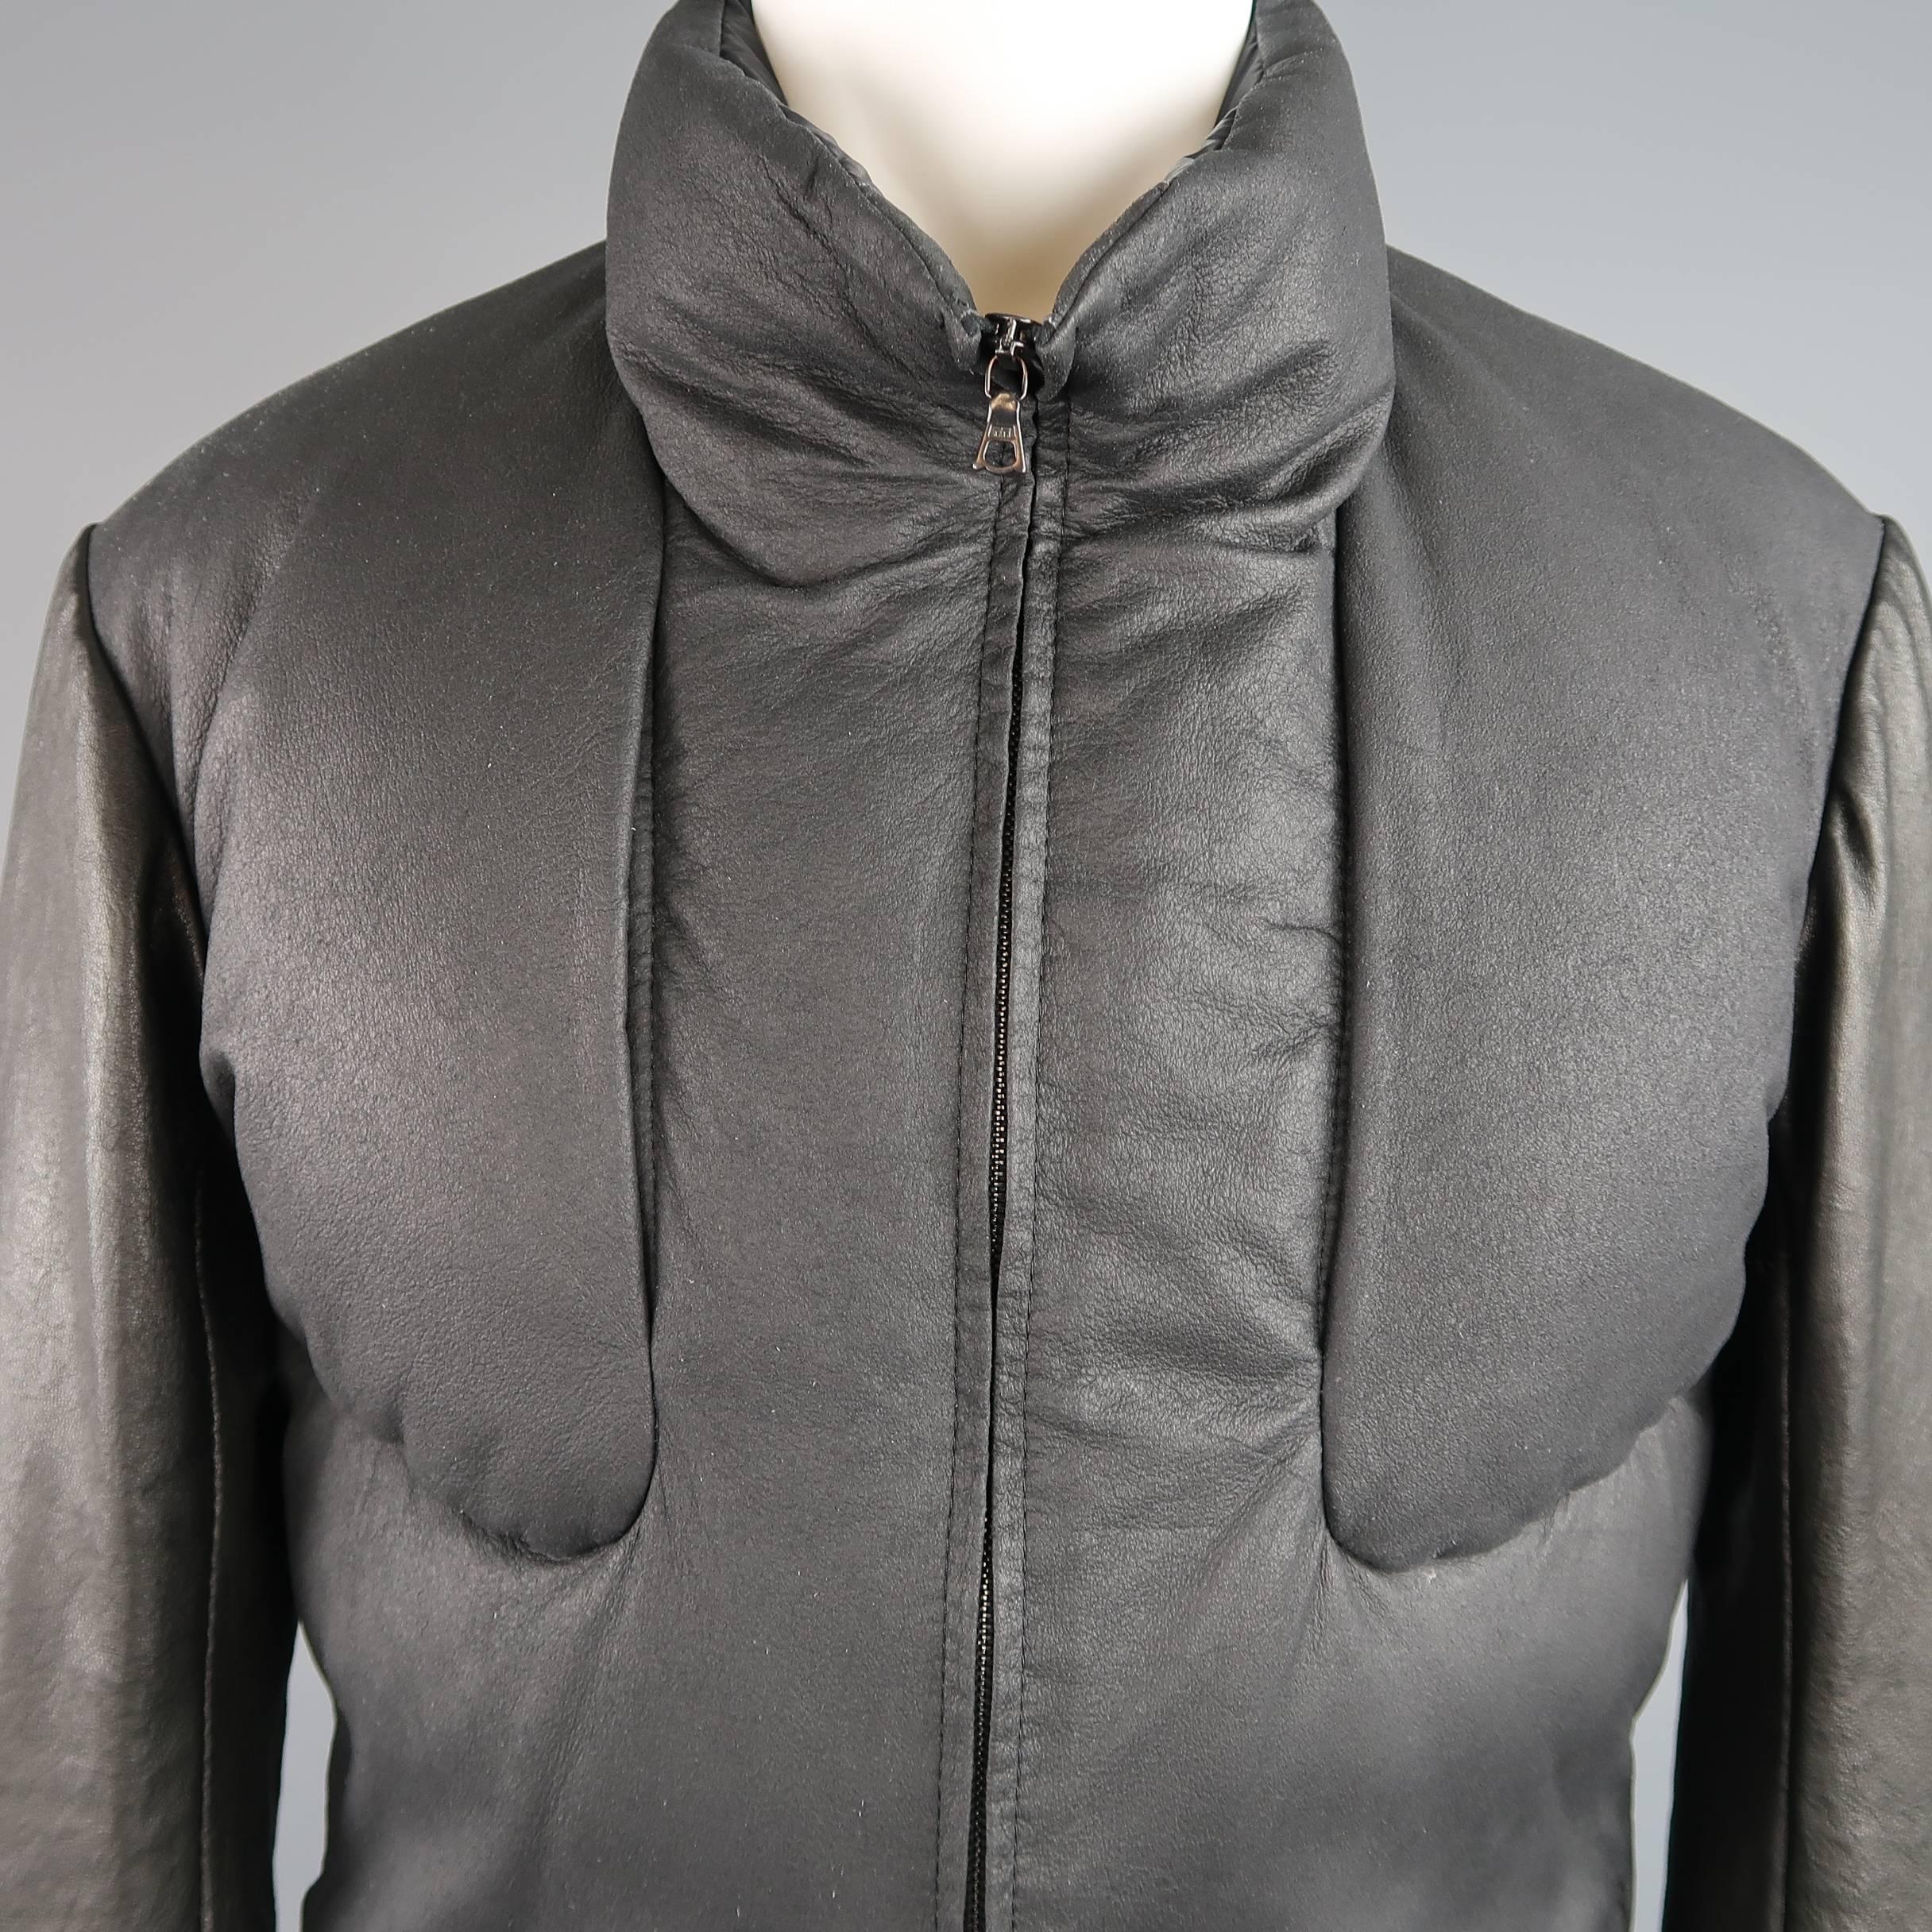 ISAAC SELLAM bomber jacket features a high collar, down filled deerskin textured leather body with chest pockets, and lamb skin leather sleeves with dark gold tone closure cuffs and grey knit glove liner. Made in France.
 
Good Pre-Owned